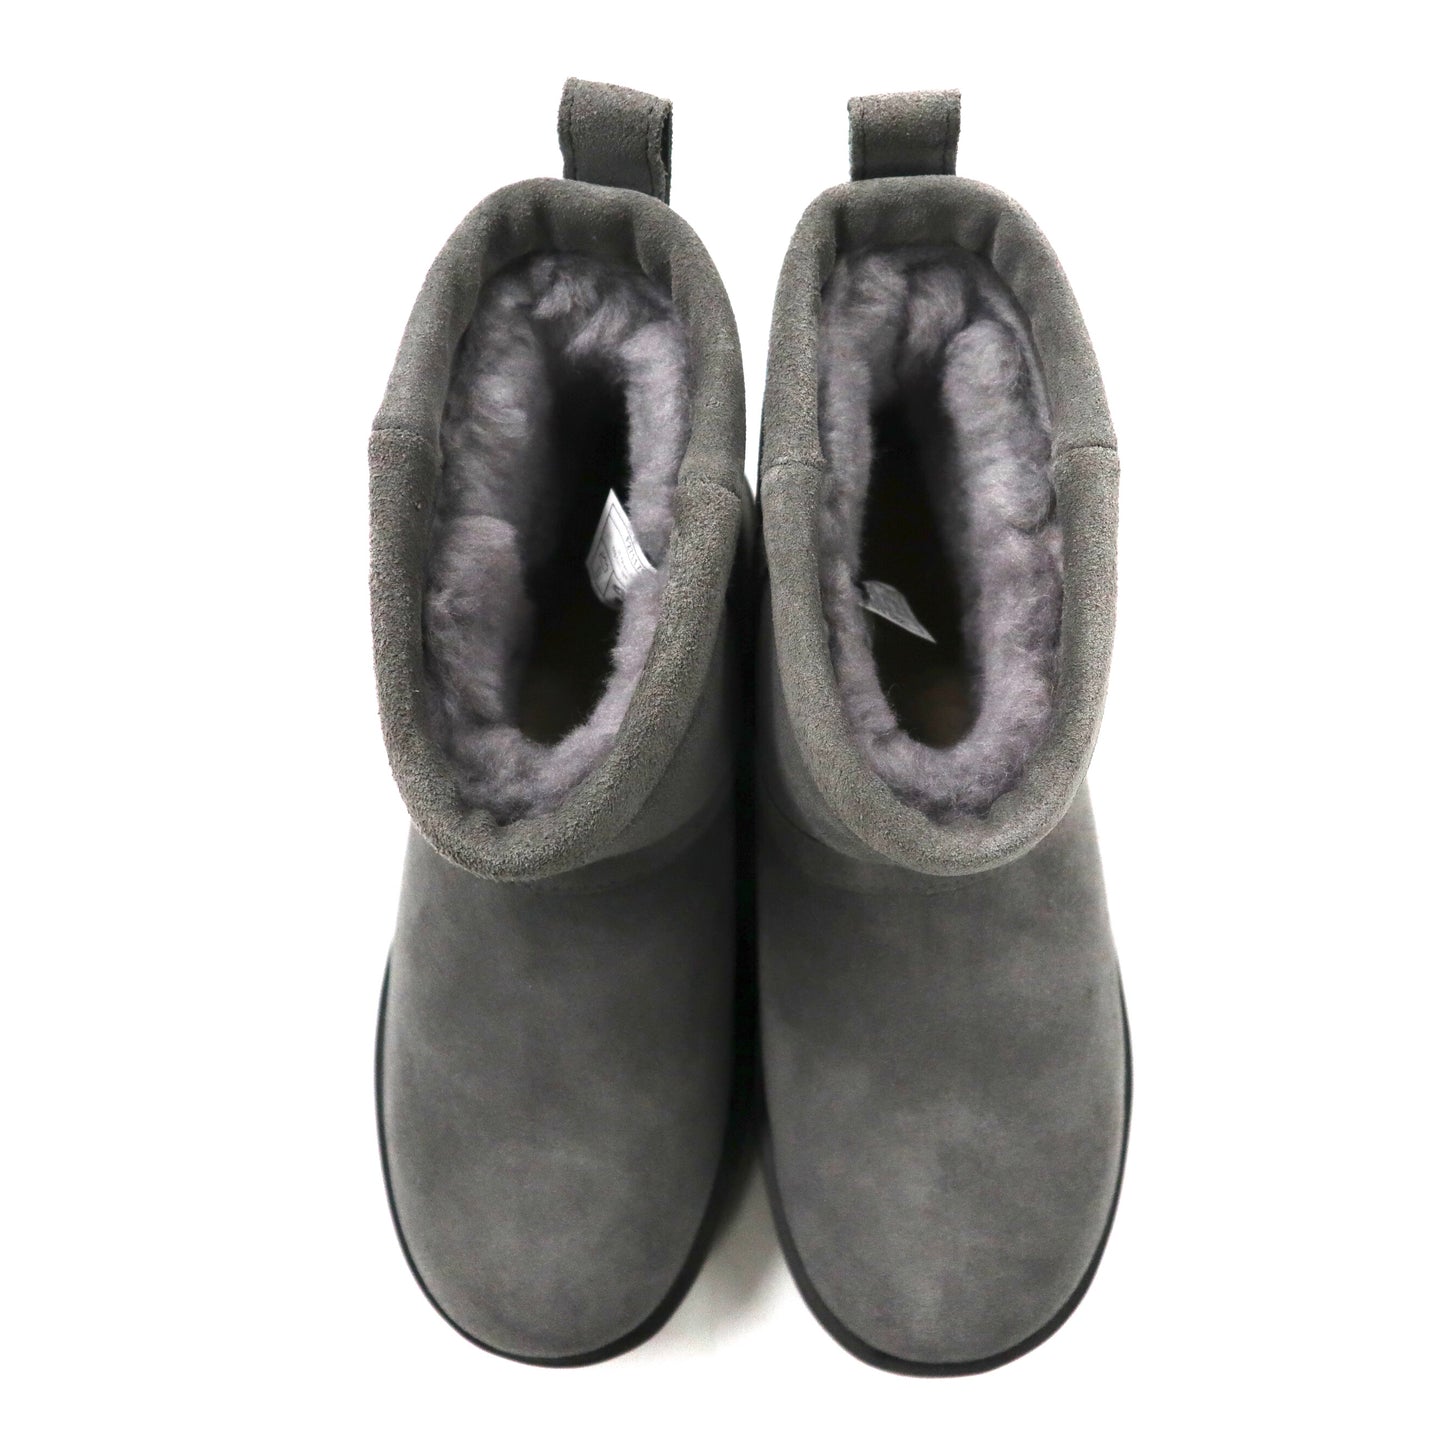 UGG Short Mouton Boots US5 Gray Sheep Leather VIBRAM Sole 